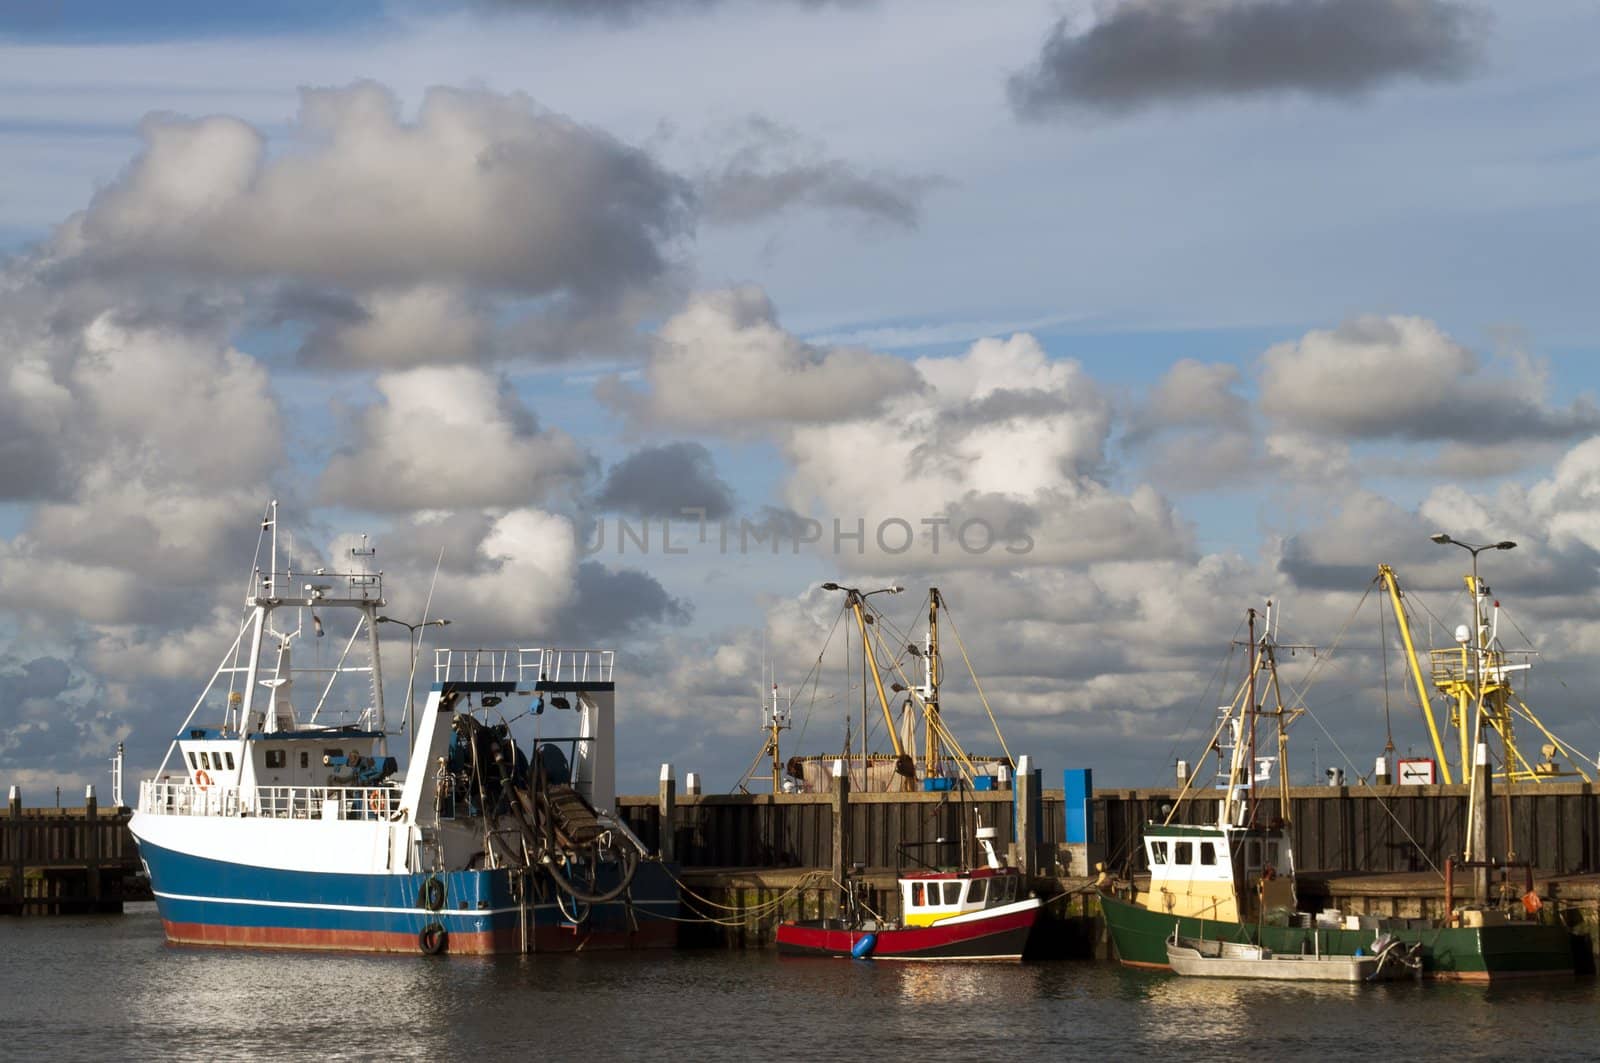 Transport ship with clouds, in Den Hag, Netherlands